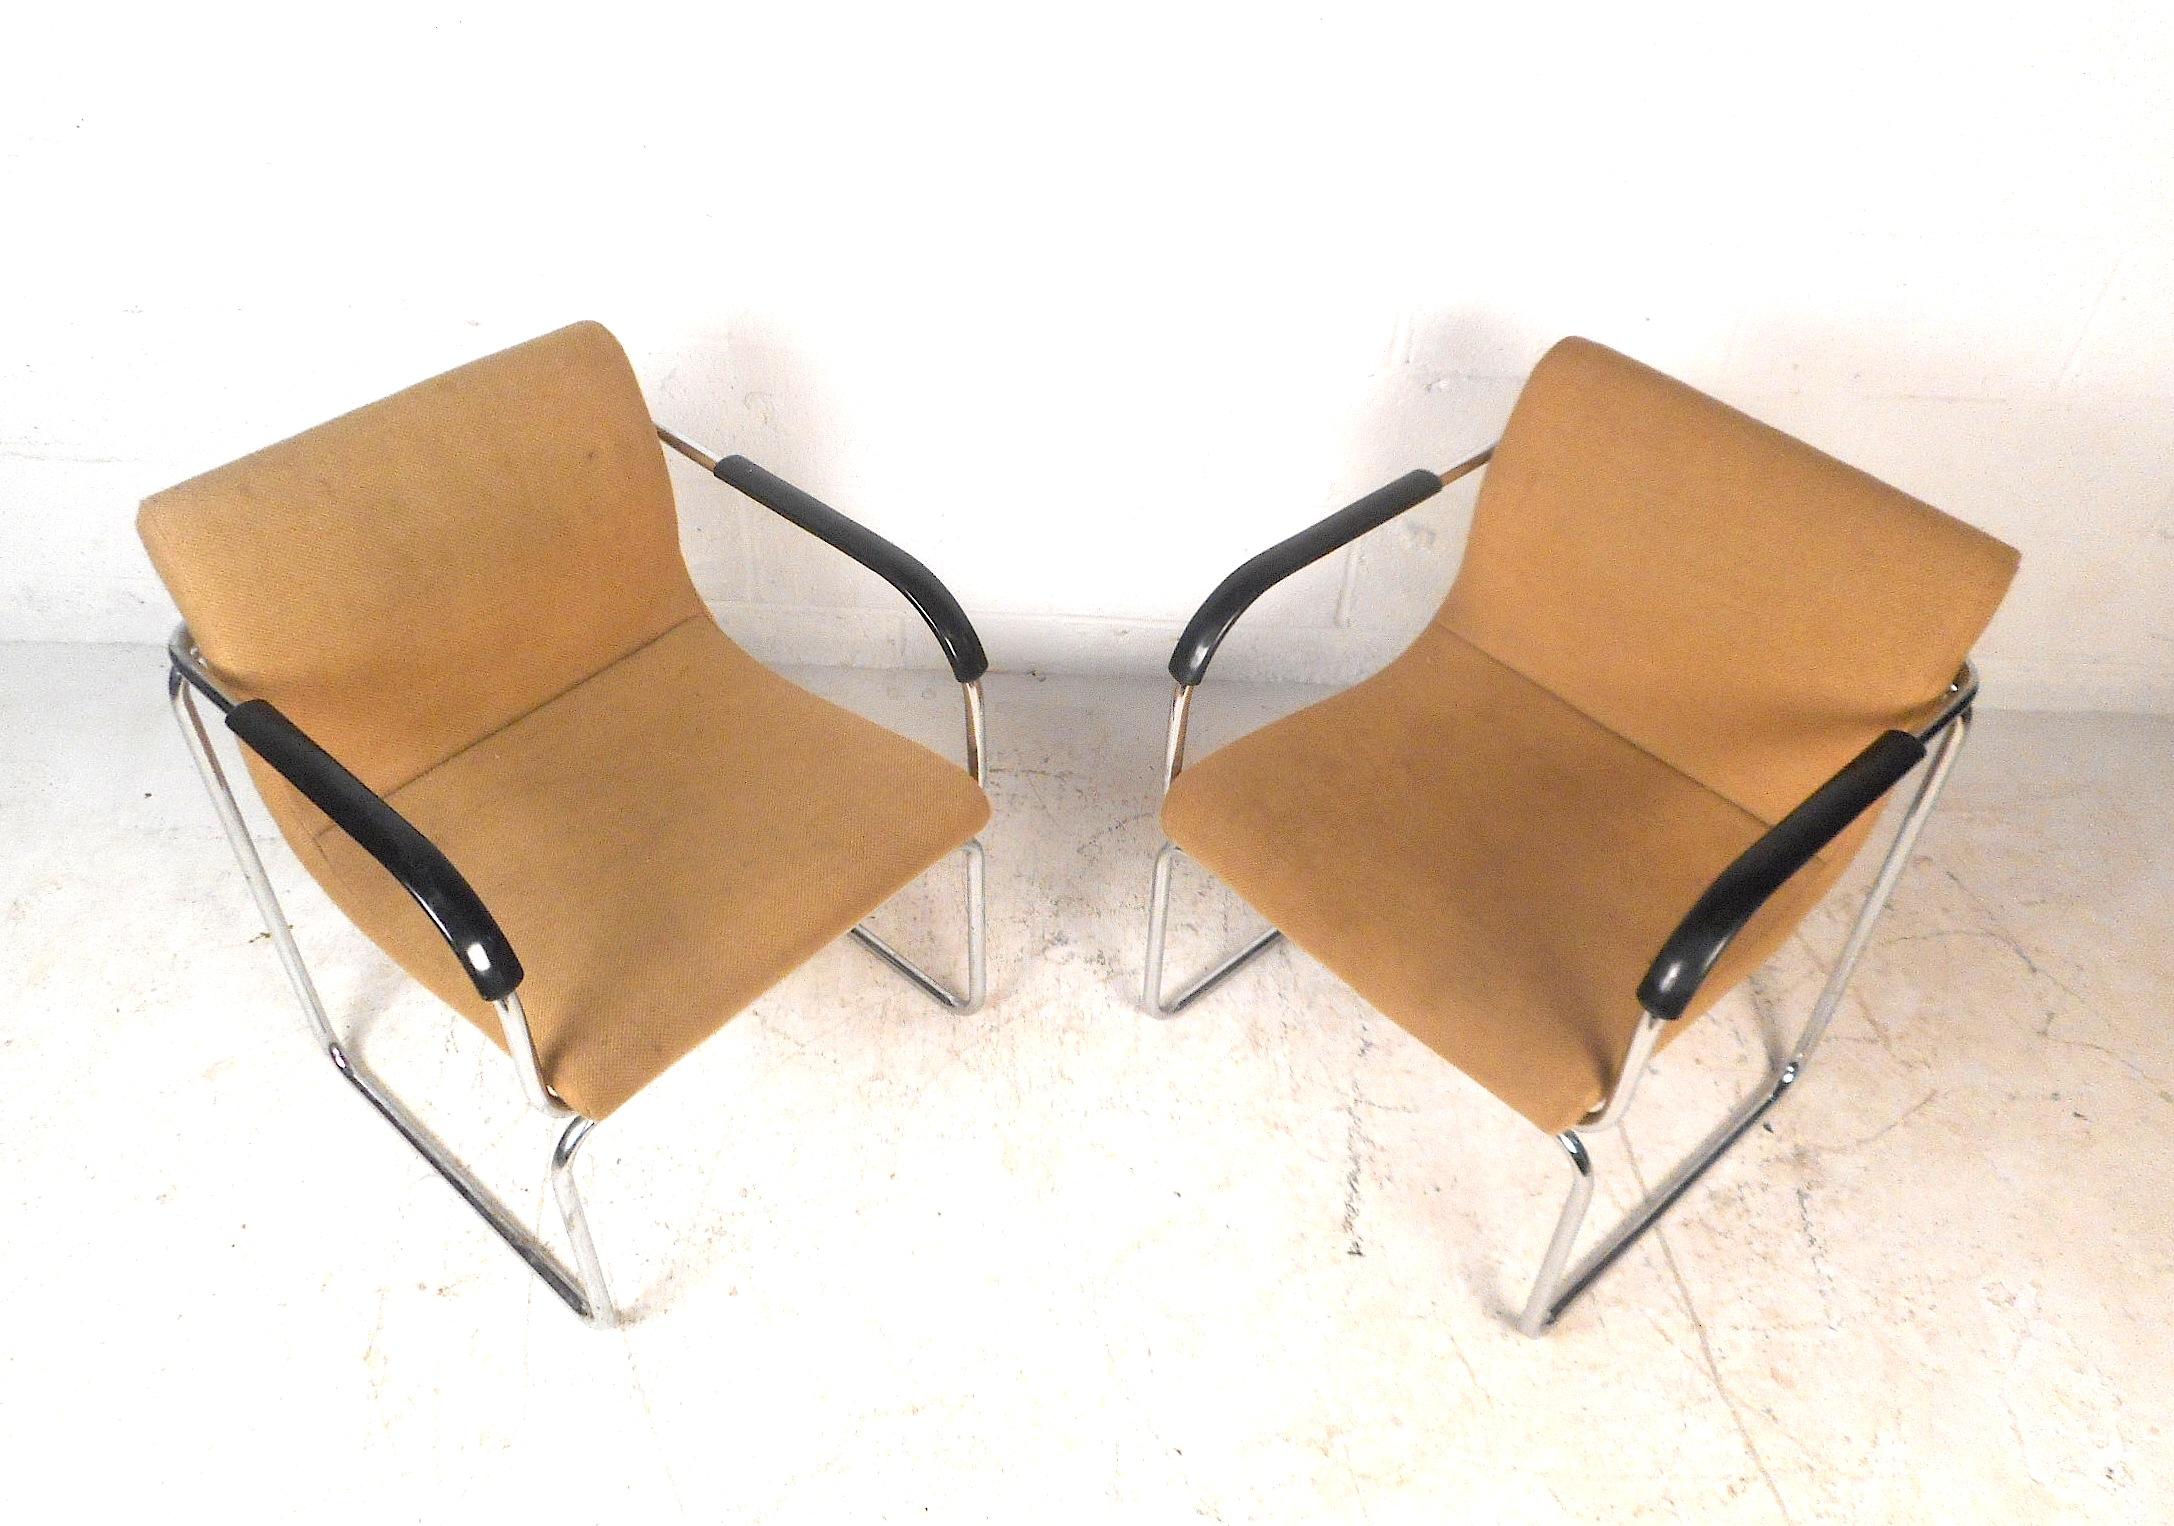 This impressive pair of vintage modern lounge chairs features a sturdy chrome frame and a form-fitting backrest. The chairs are upholstered with a comfortable sand-colored fabric. These Art Deco style lounge chairs will provide a seating arrangement